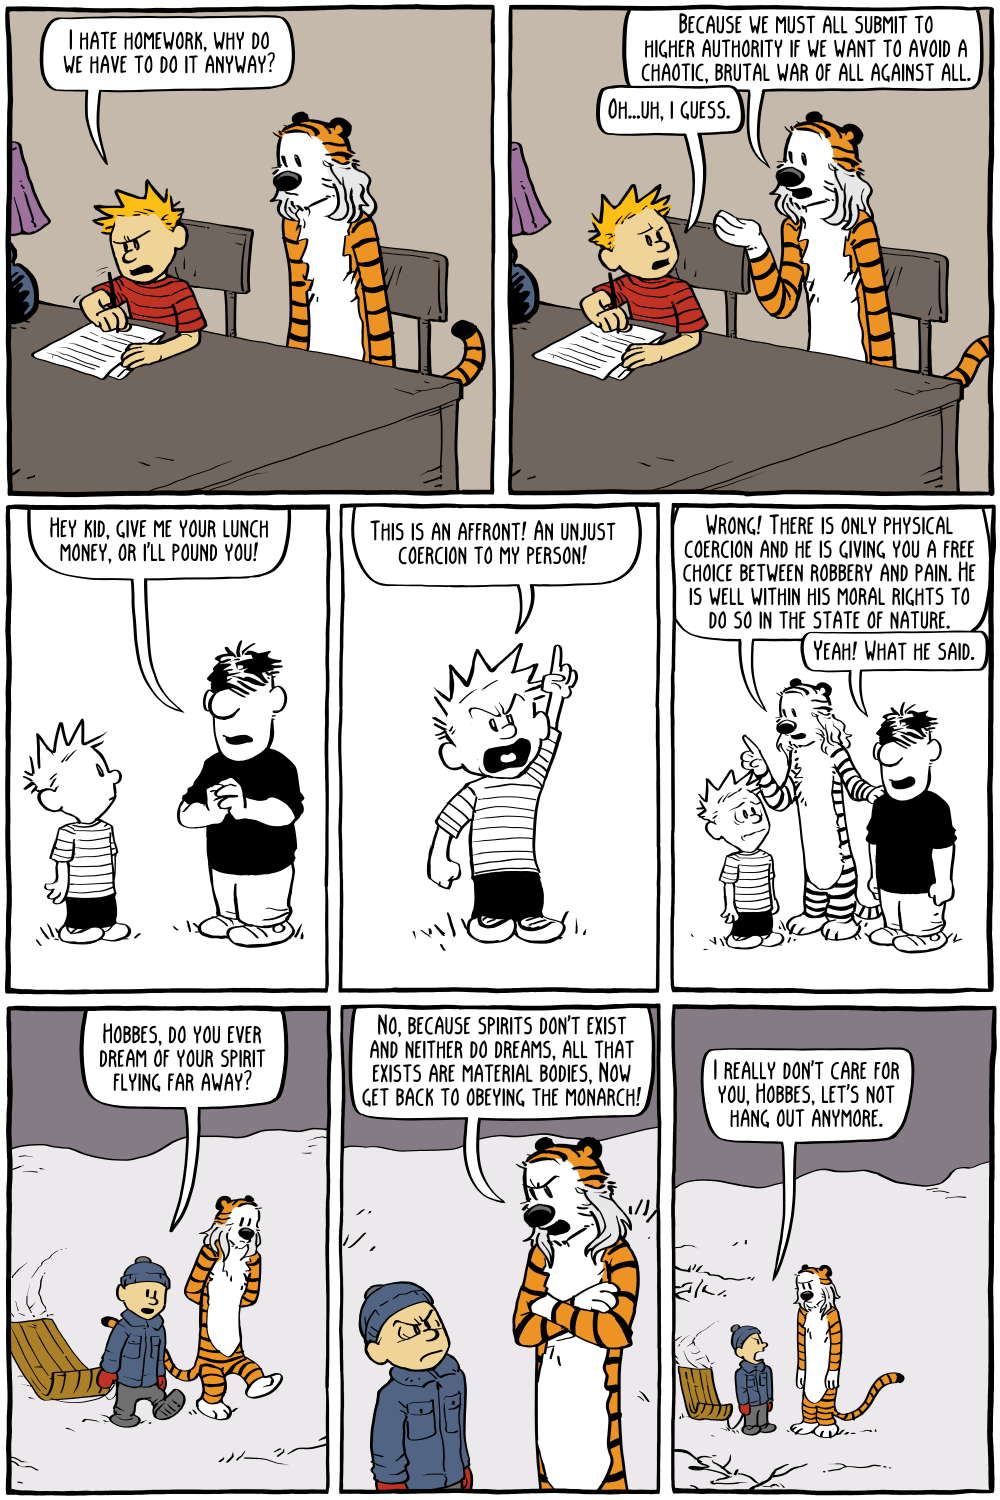 Calvin: "I hate homework, why do we have to do it anyway?"
Hobbes: "Because we must all submit to higher authority if we want to avoid a chaotic, brutal war of all against all.  "
Calvin: "Oh...uh, i guess."

[next comic strip]
Bully: "Hey kid, give me your lunch money, or I'll pound you!"
Calvin: "This is an affront! An unjust coercion to my person!"
Hobbes: "Wrong! There is only physical coercion and he is giving you a free choice between robbery and pain. He is well within his moral rights to do so in the state of nature."
Bully: "Yeah! What he said."

[next comic strip]
Calvin: "Hobbes, do you ever dream of your spirit flying far away?"
Hobbes: "No, because spirits don't exist and neither do dreams, all that exists are material bodies, Now get back to obeying the monarch!"
Calvin: "I really don't care for you, Hobbes, let's not hang out anymore."

